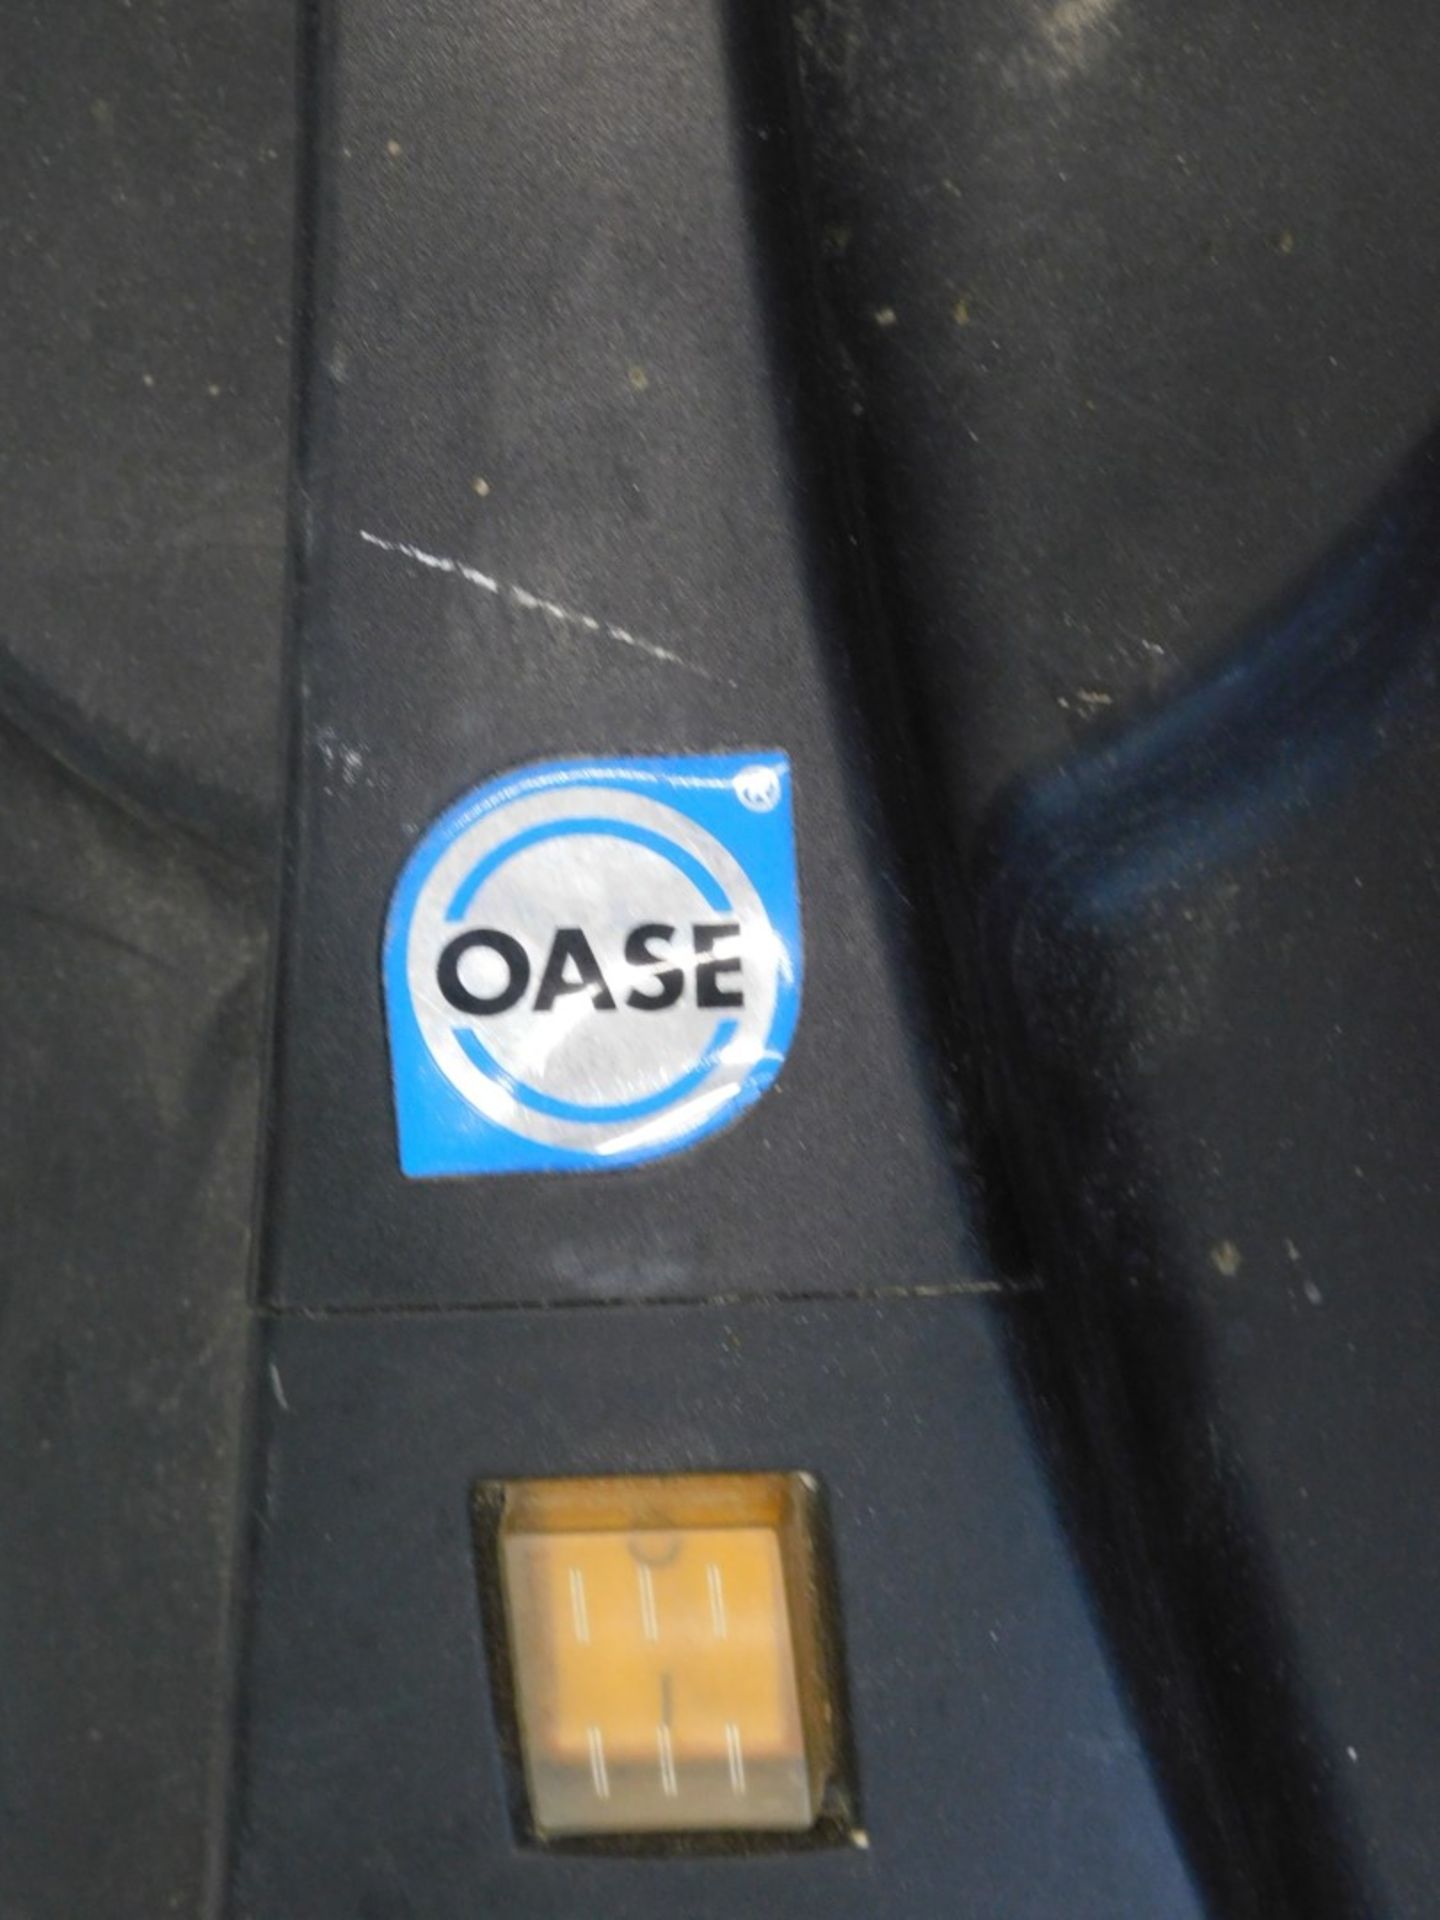 An Oase industrial pond vacuum cleaner, with accessories, 92cm high. - Image 2 of 2